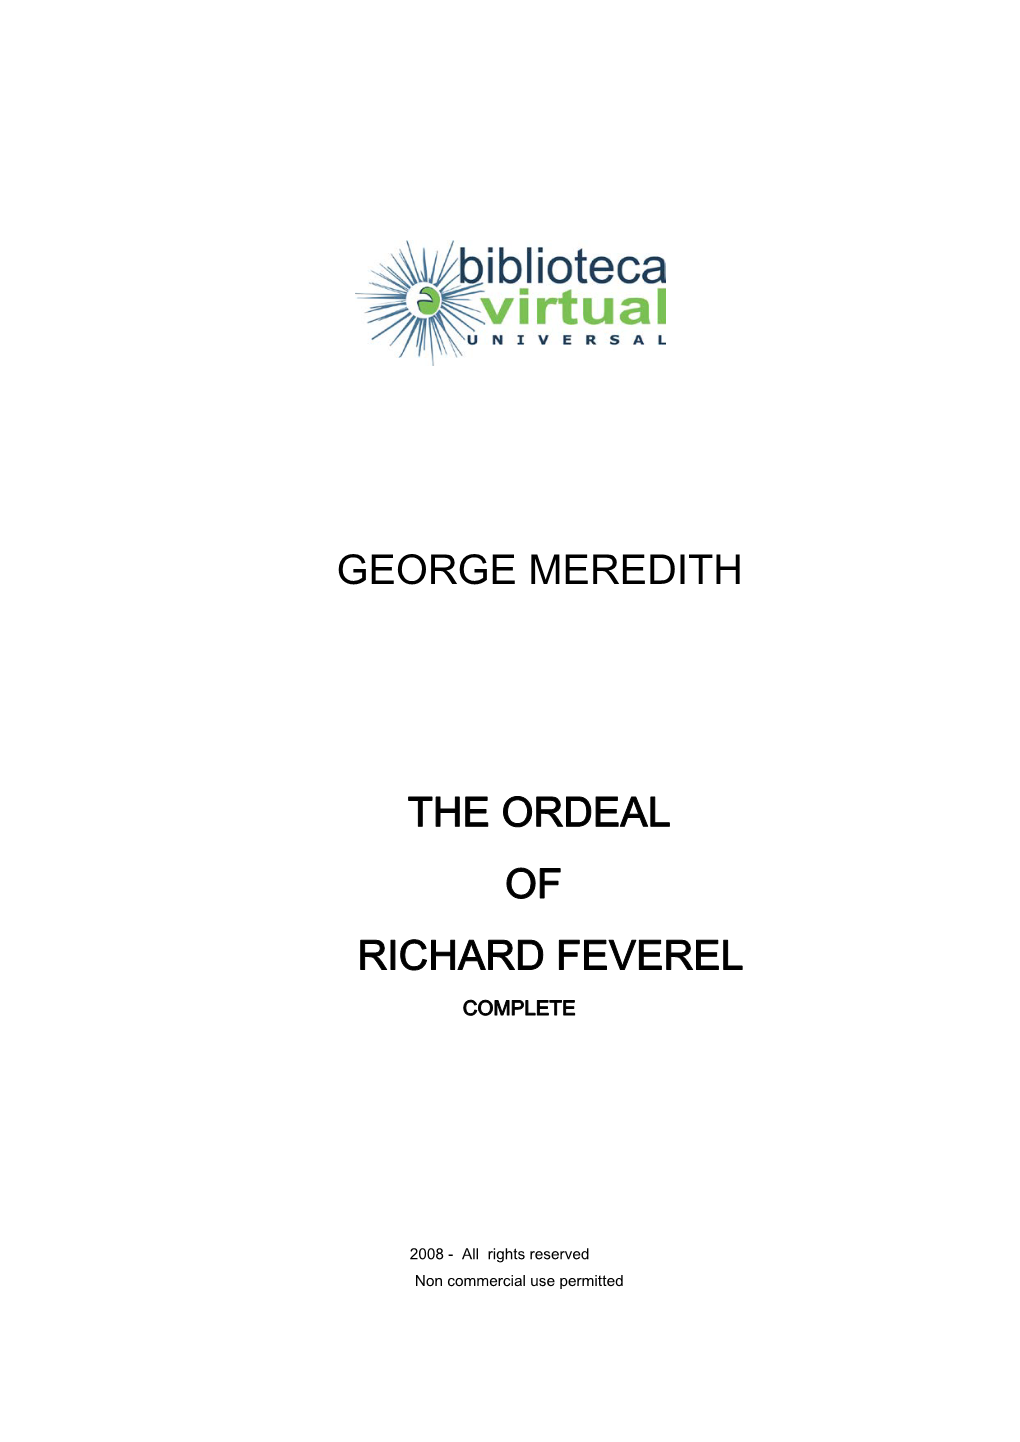 George Meredith the Ordeal of Richard Feverel